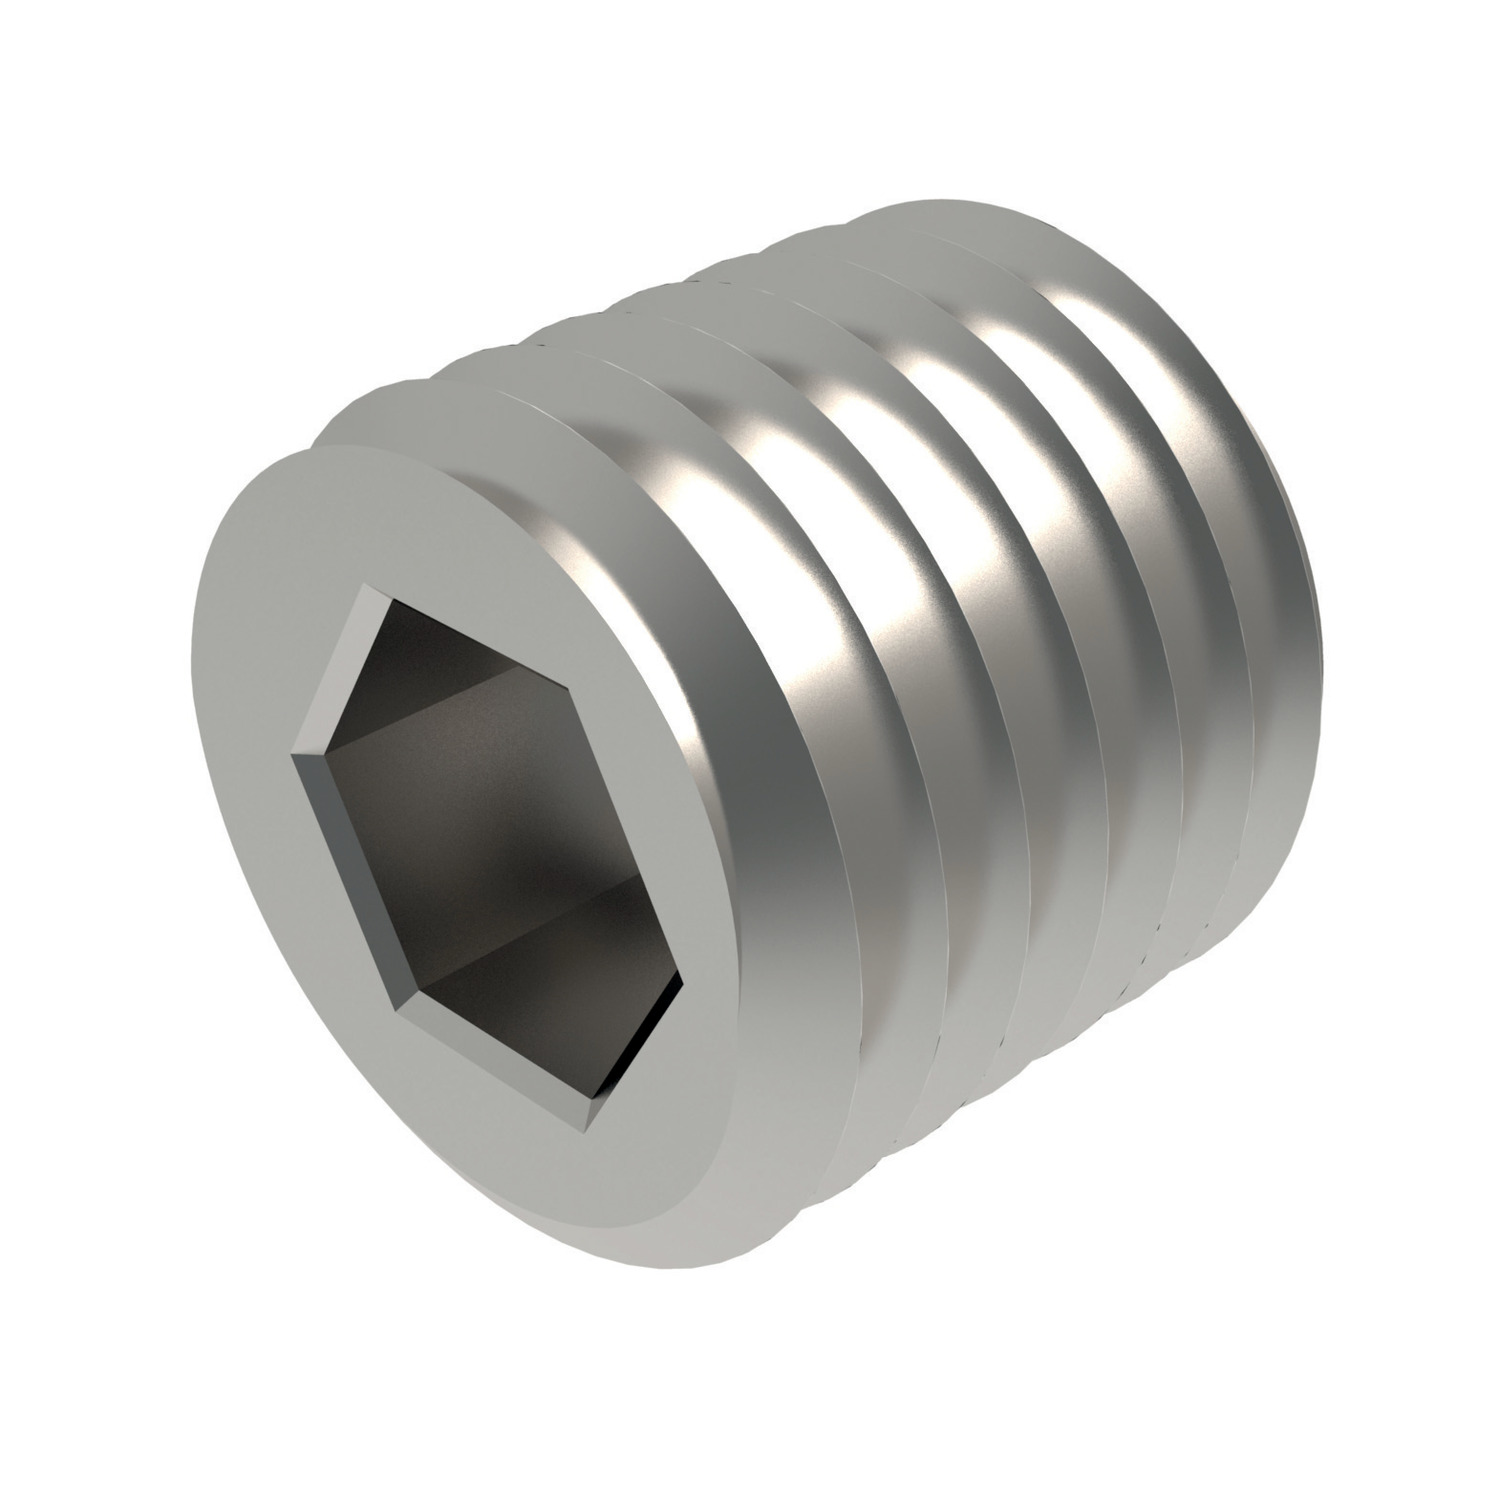 P0199.080-012-A2 Threaded Restrictor M8x1. 1.22 orifice A2 stainless steel. DANGER: Ensure this part is installed according to instructions in the product data sheet and installation notes. Holes must be completely free of oil, grease and debris.